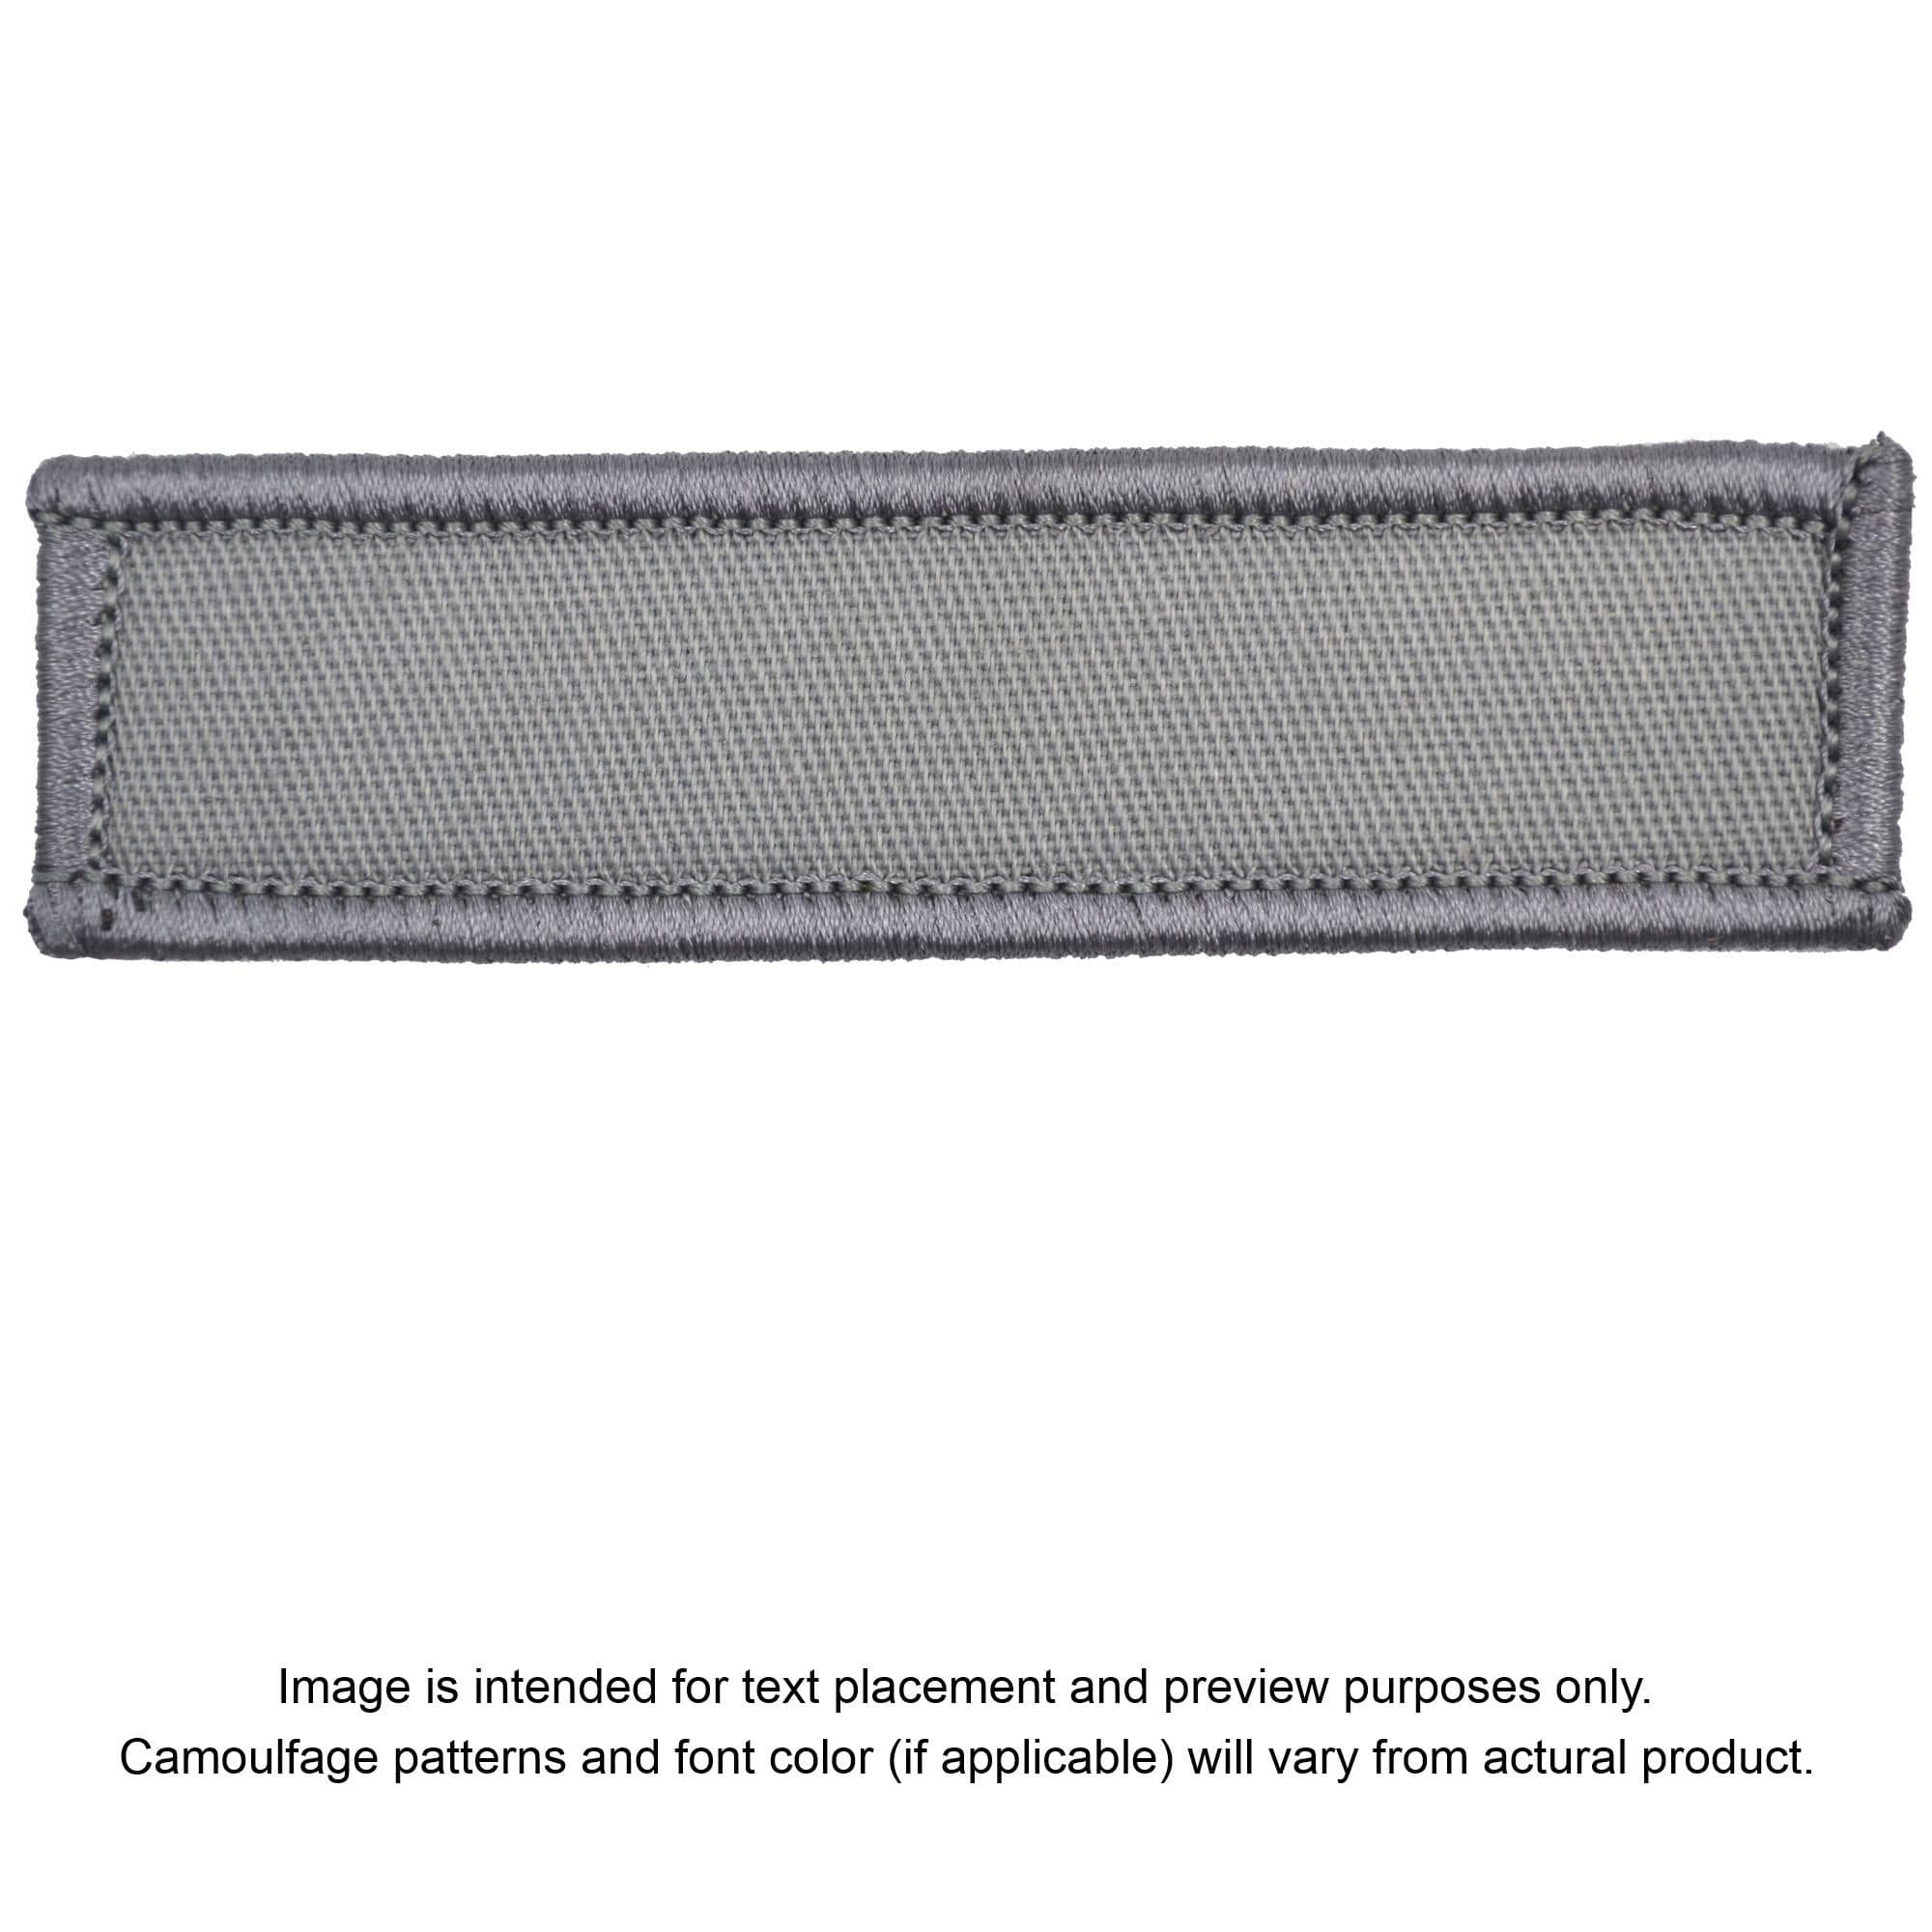 Blank Molle Badge, Molle Patches